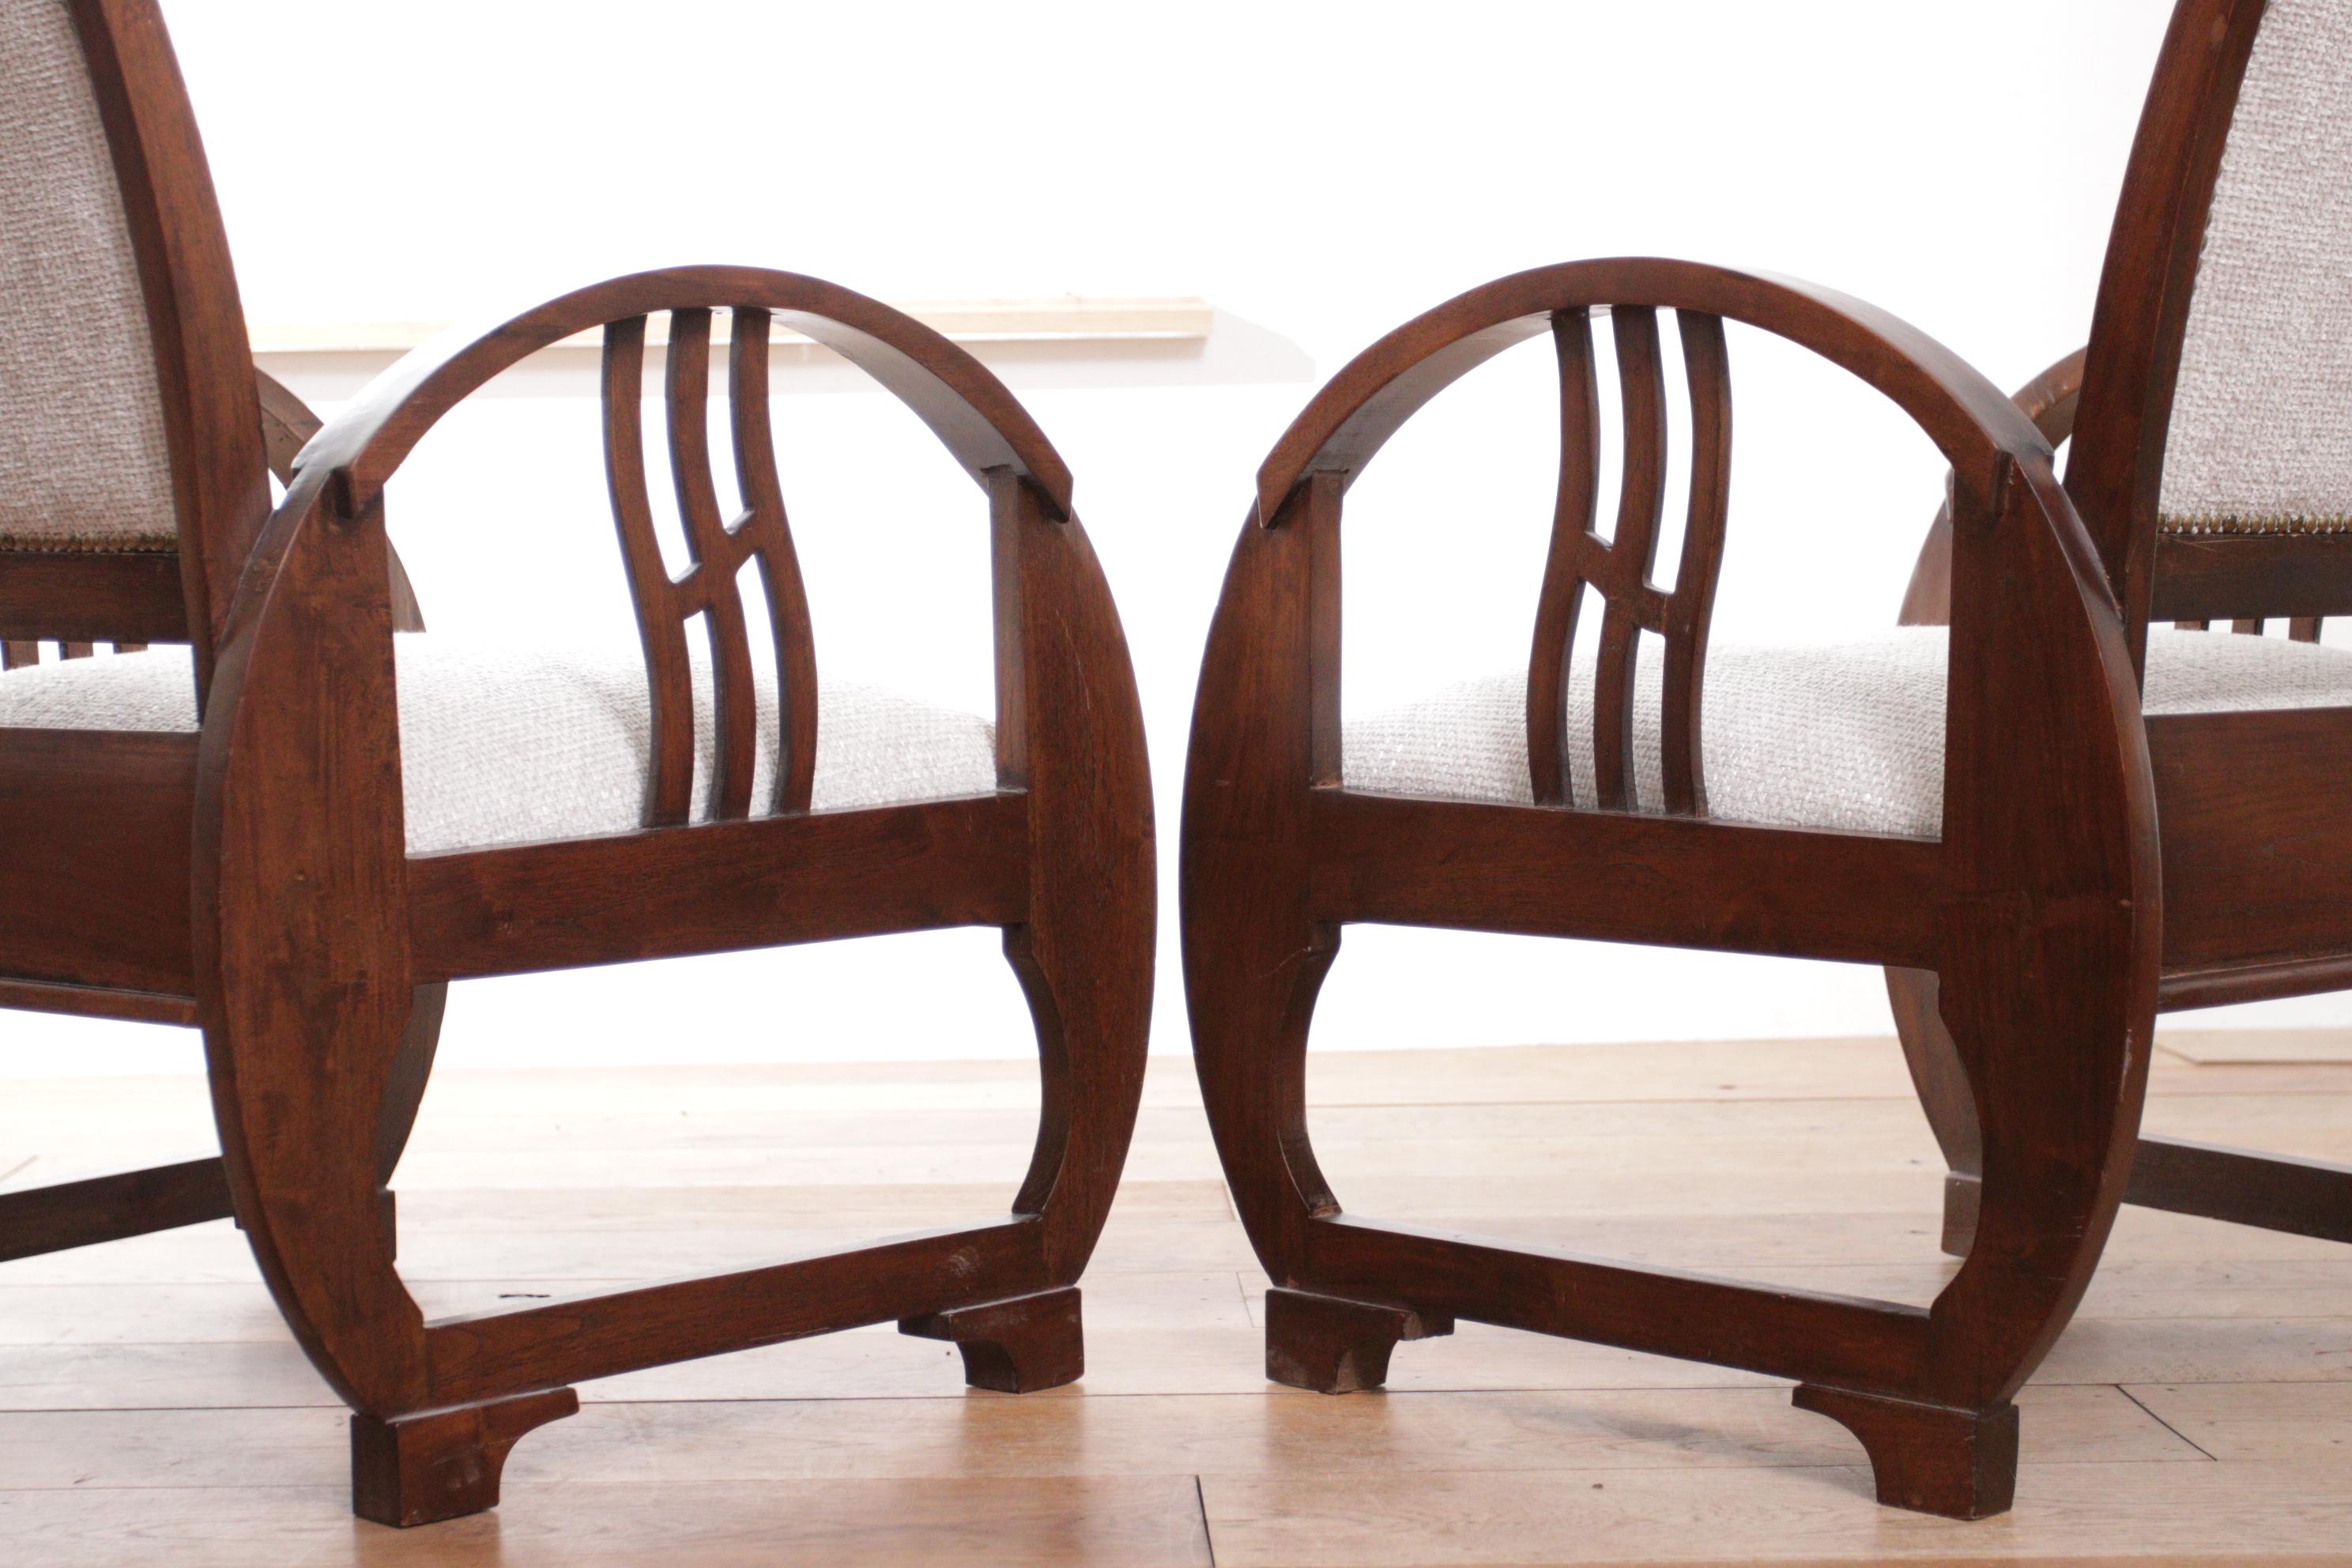 Two Rare Exclusive Elegant Art Deco Vintage French Wooden Armchairs 1930's 8